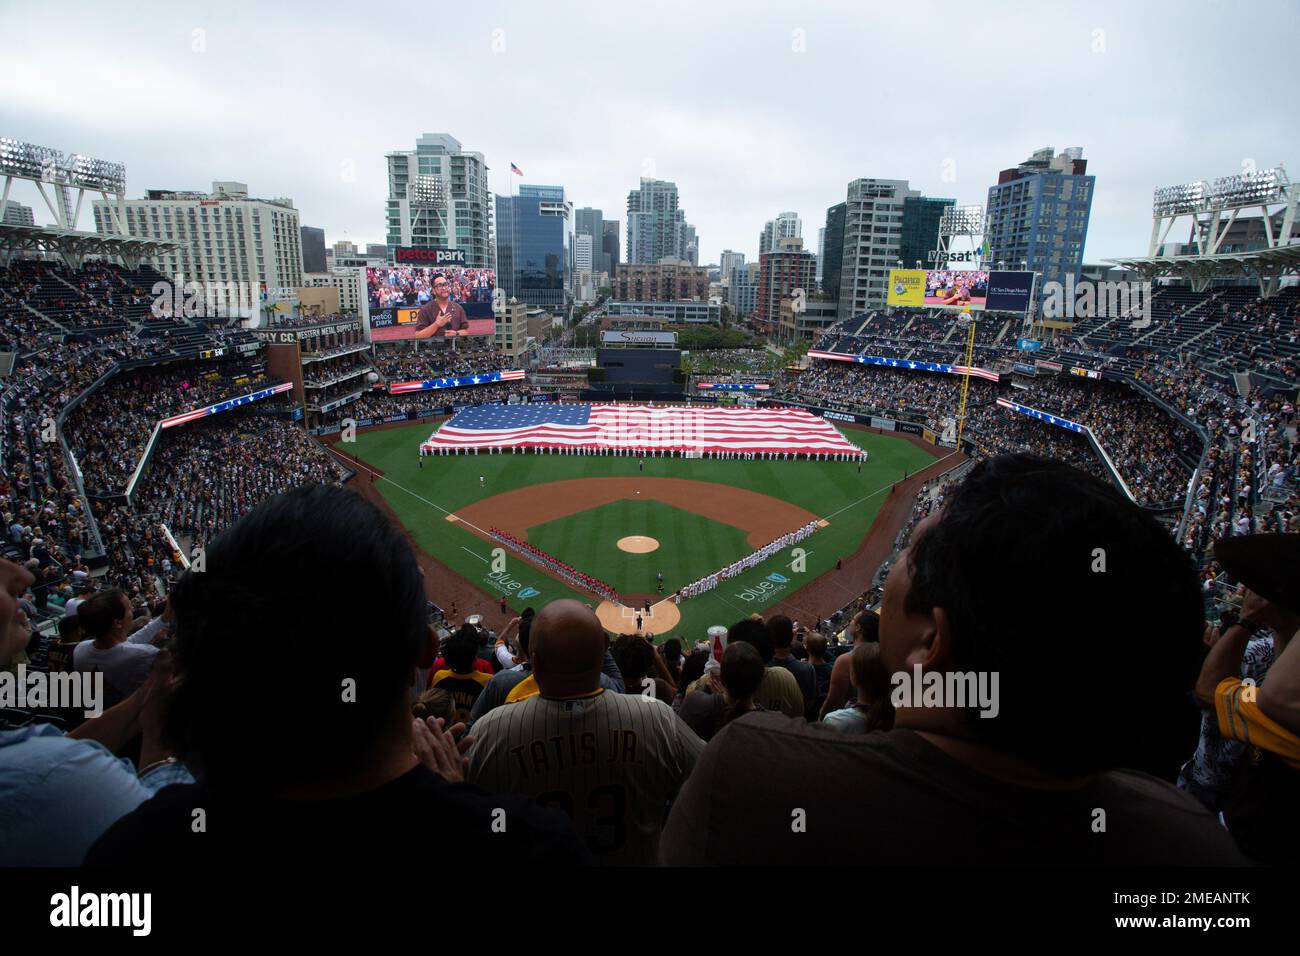 A giant American flag is displayed during the national anthem prior to a baseball game between the San Diego Padres and the Cincinnati Reds Thursday, June 17, 2021, in San Diego. Petco Park opened up for full capacity viewing of a baseball game without masks for the first time since the 2019 season. (AP Photo/Derrick Tuskan) Foto Stock